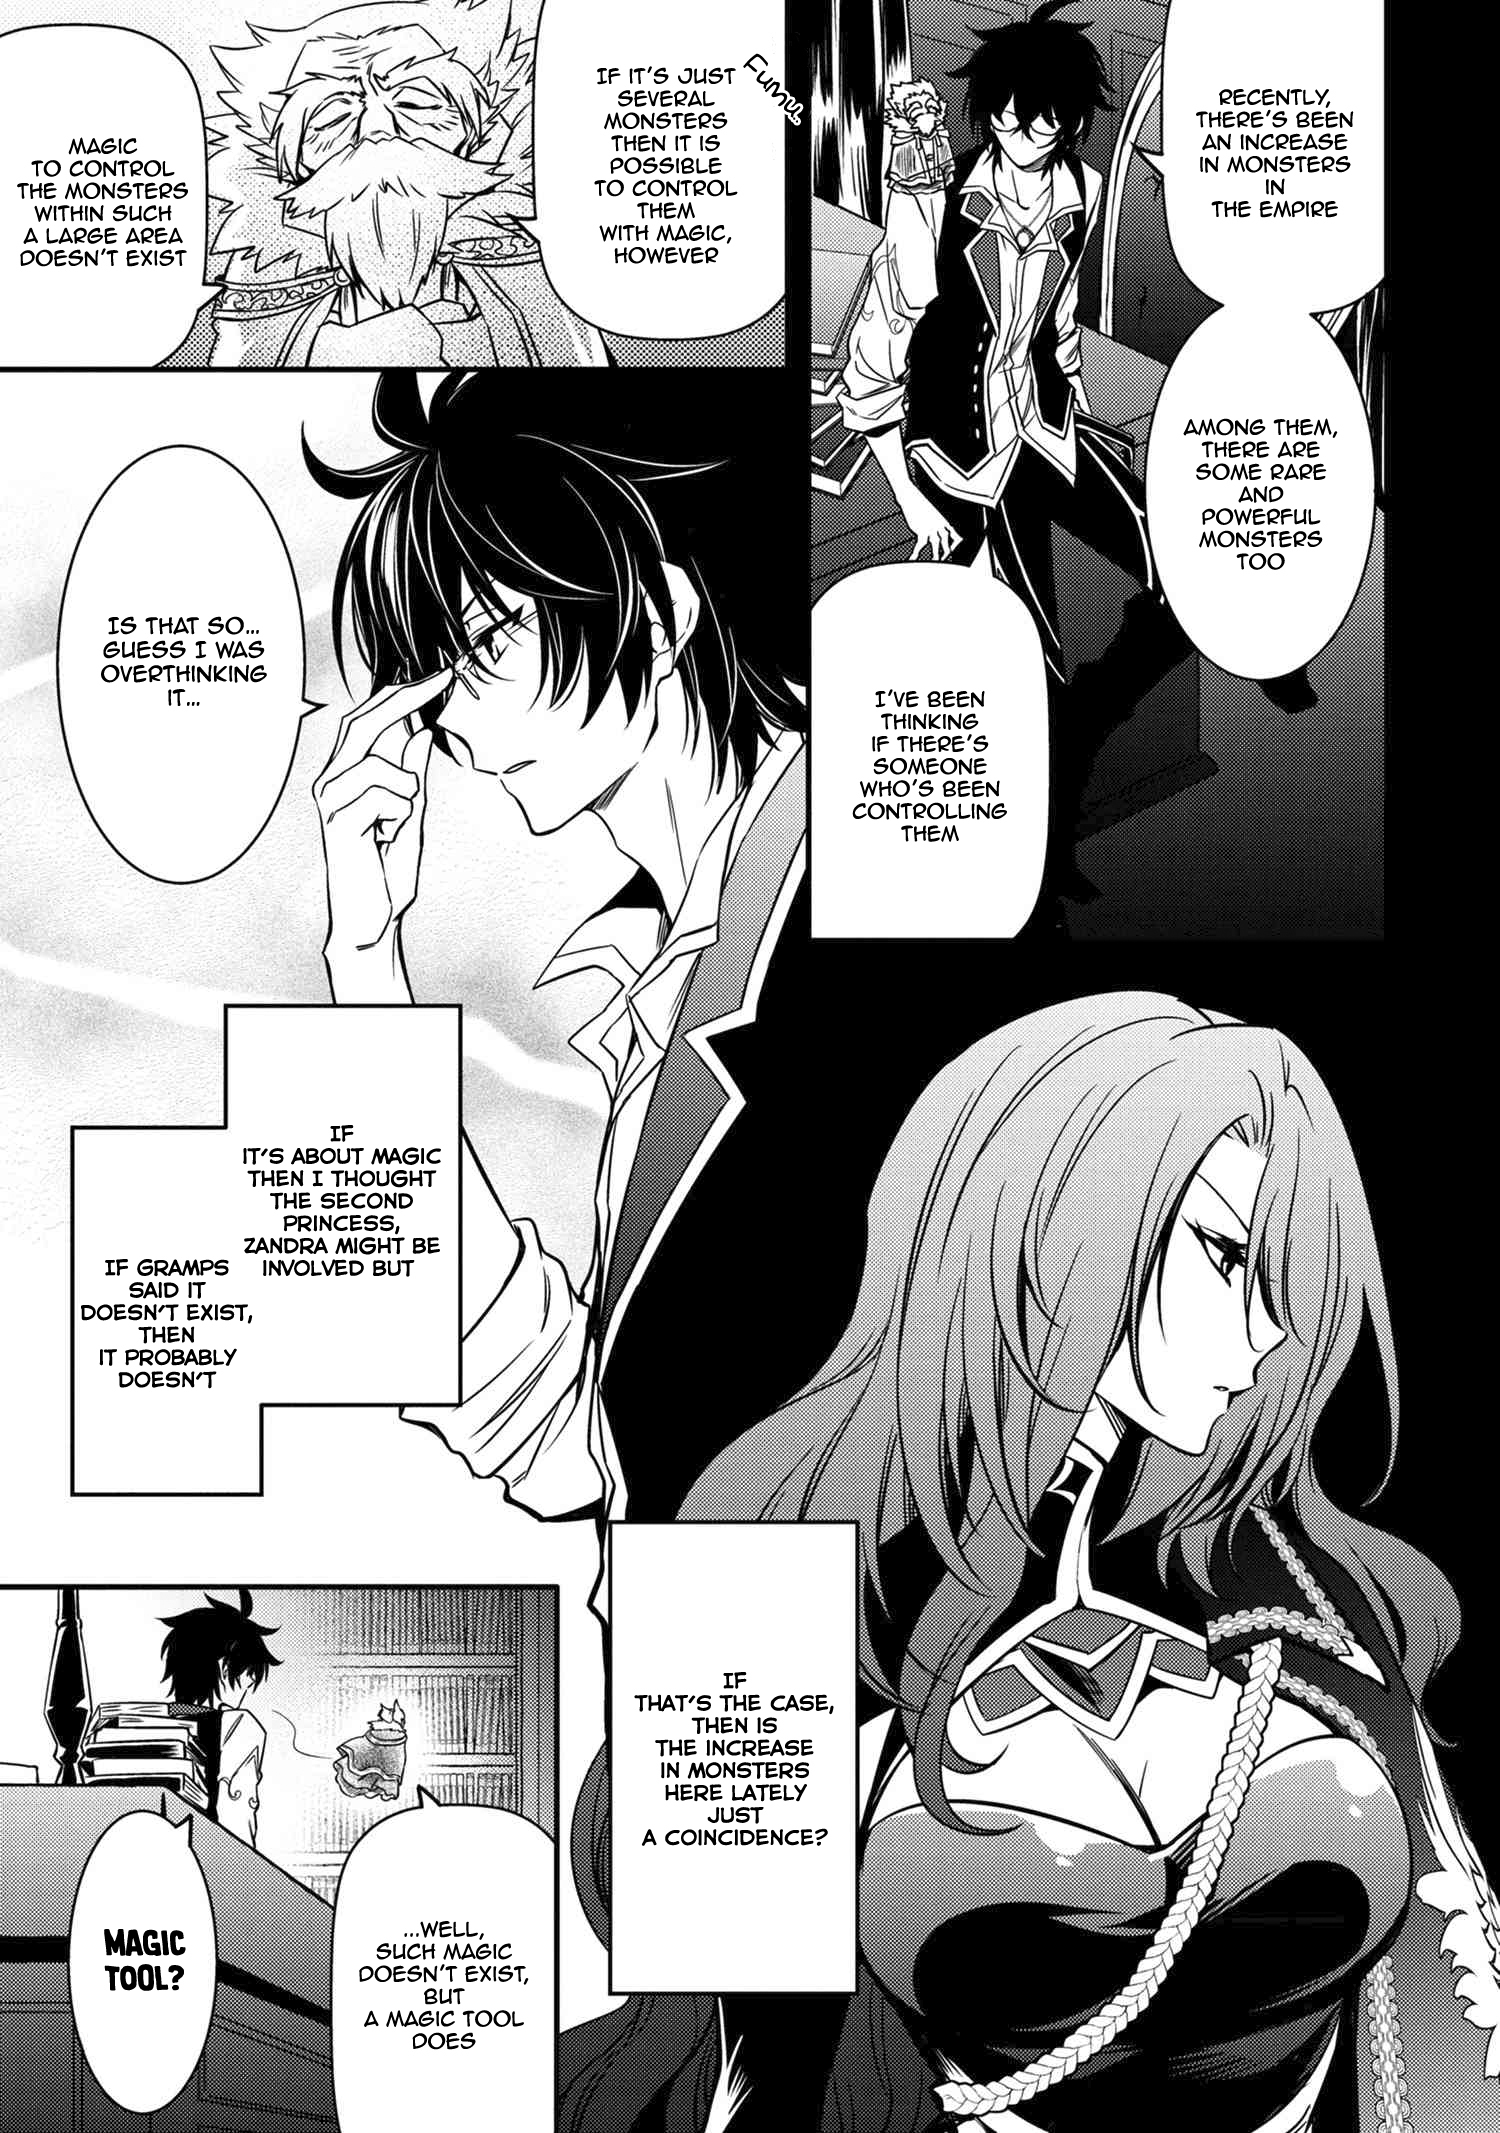 The Strongest Dull Prince’s Secret Battle for the Throne vol.2 ch.9.1